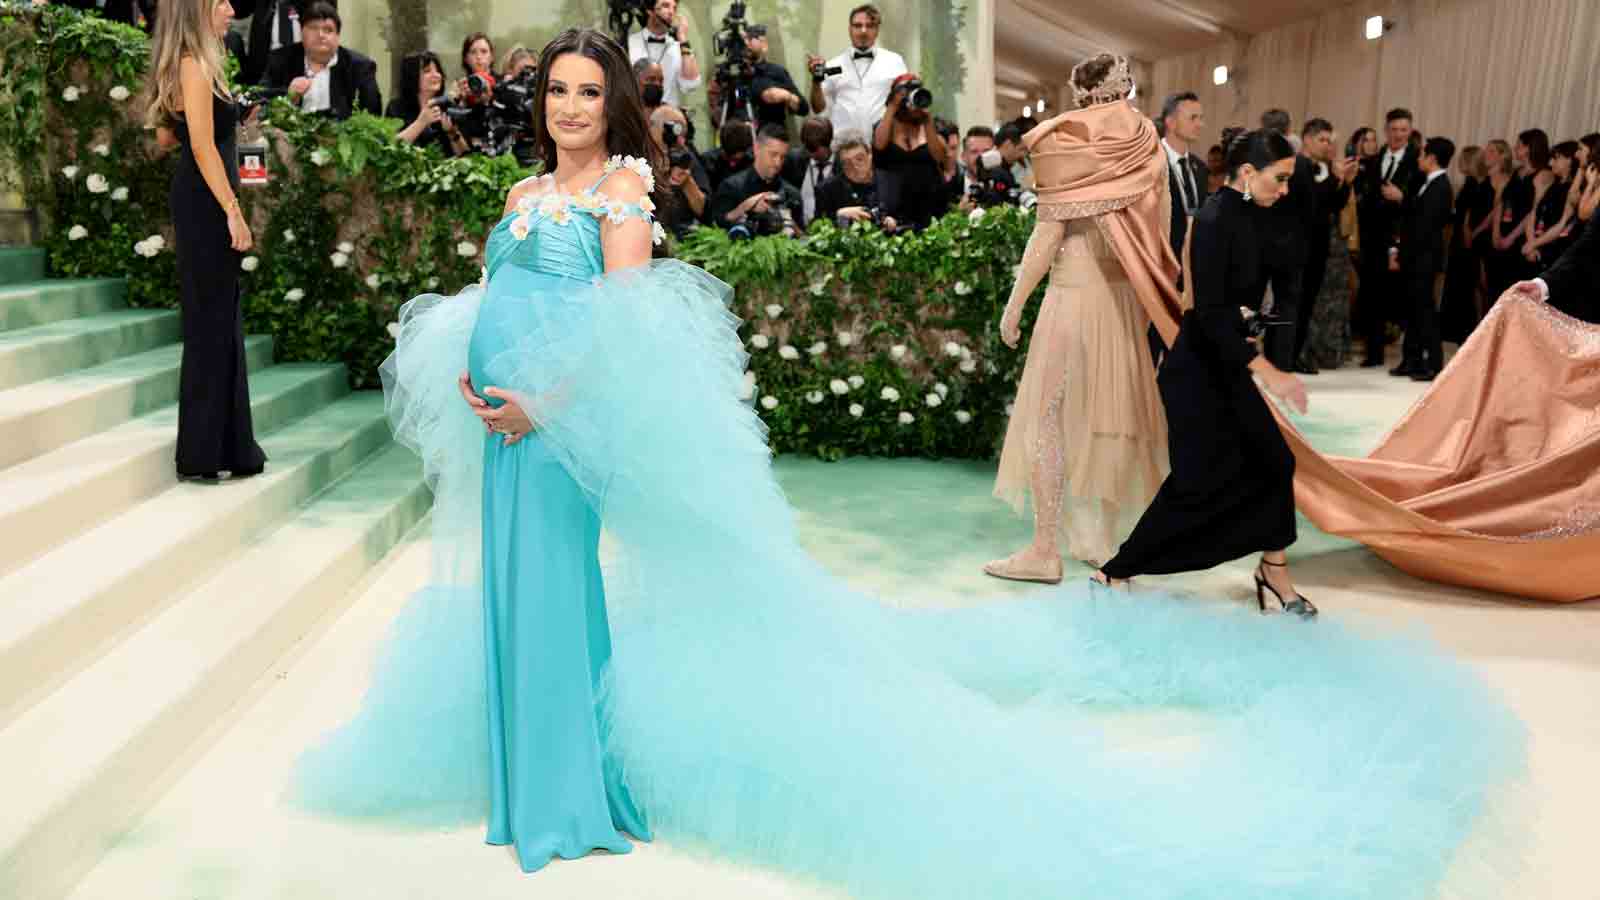 Lea Michele shows off baby bump at Met Gala